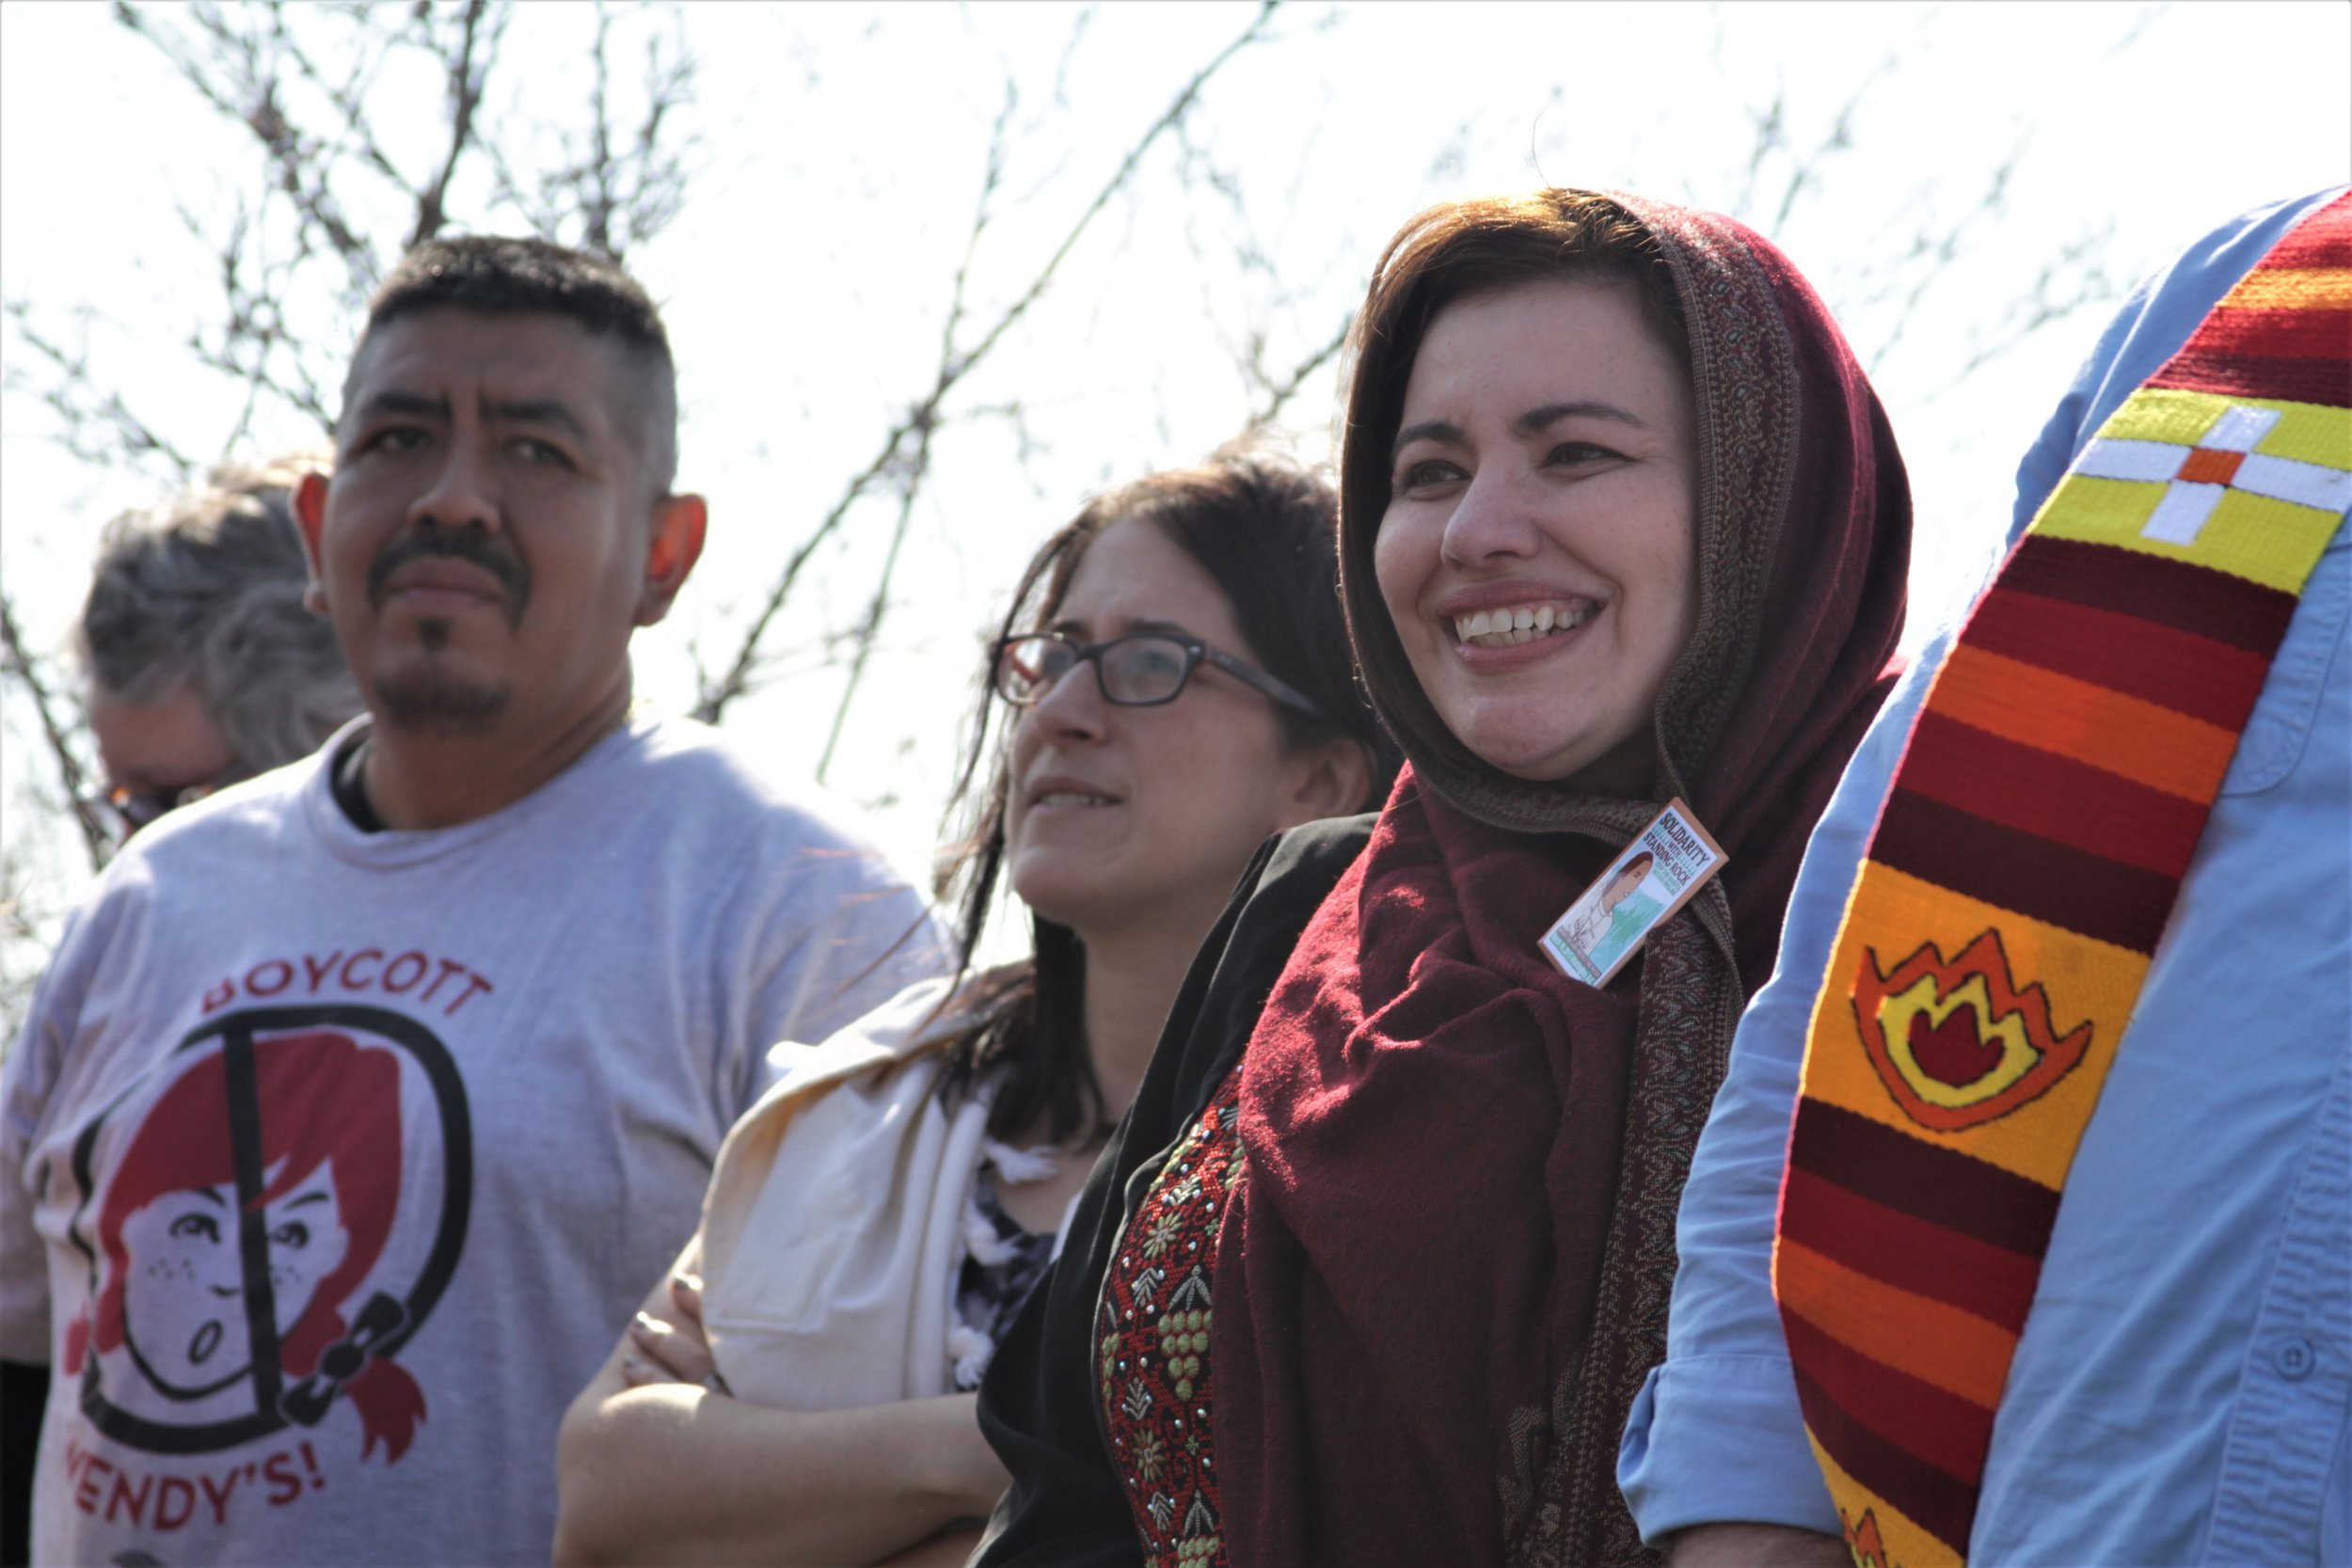  CIW's Lucas Benitez joins Rachel Kahn-Troster, Director of Programs for T'ruah and Sahar Alsahlani, Board Member of the Council on American Islamic Relations (CAIR) to welcome the nearly 100 gathered for a vigil outside Wendy's headquarters in Dubli